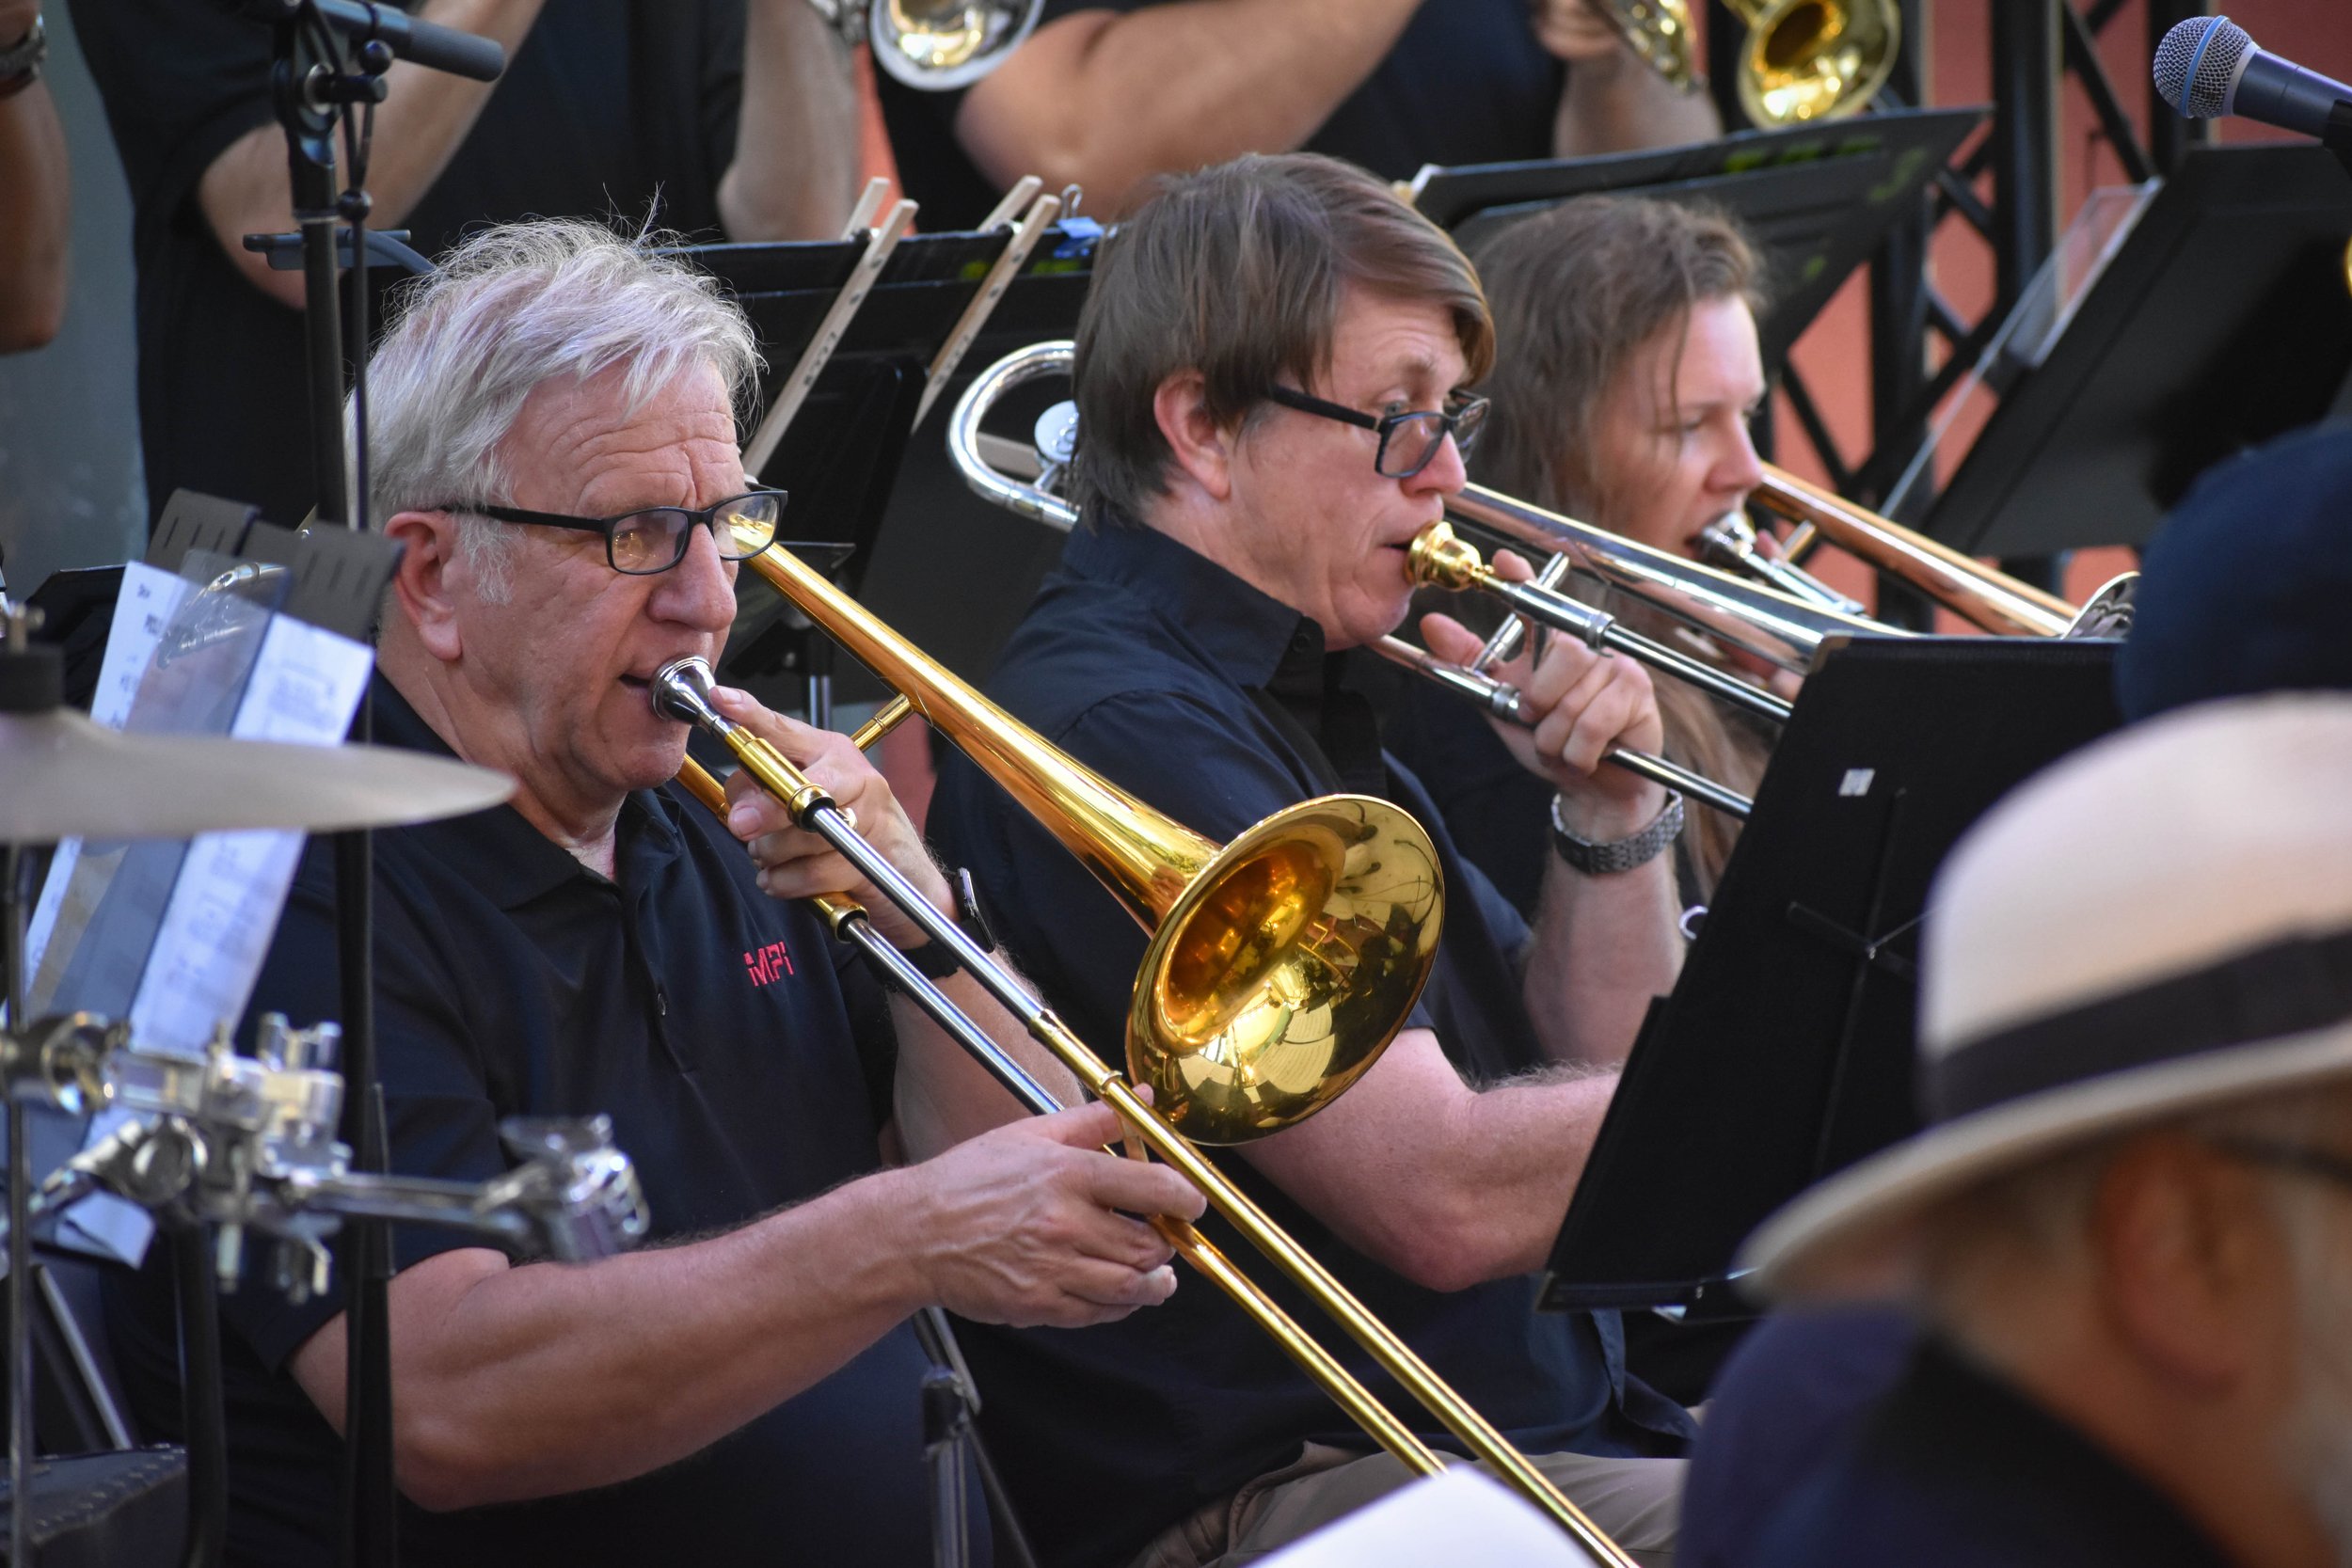 07-10-2023 Laguna Jazz Band concert at Pageant of the Masters by Peyton Webster52-49.jpg